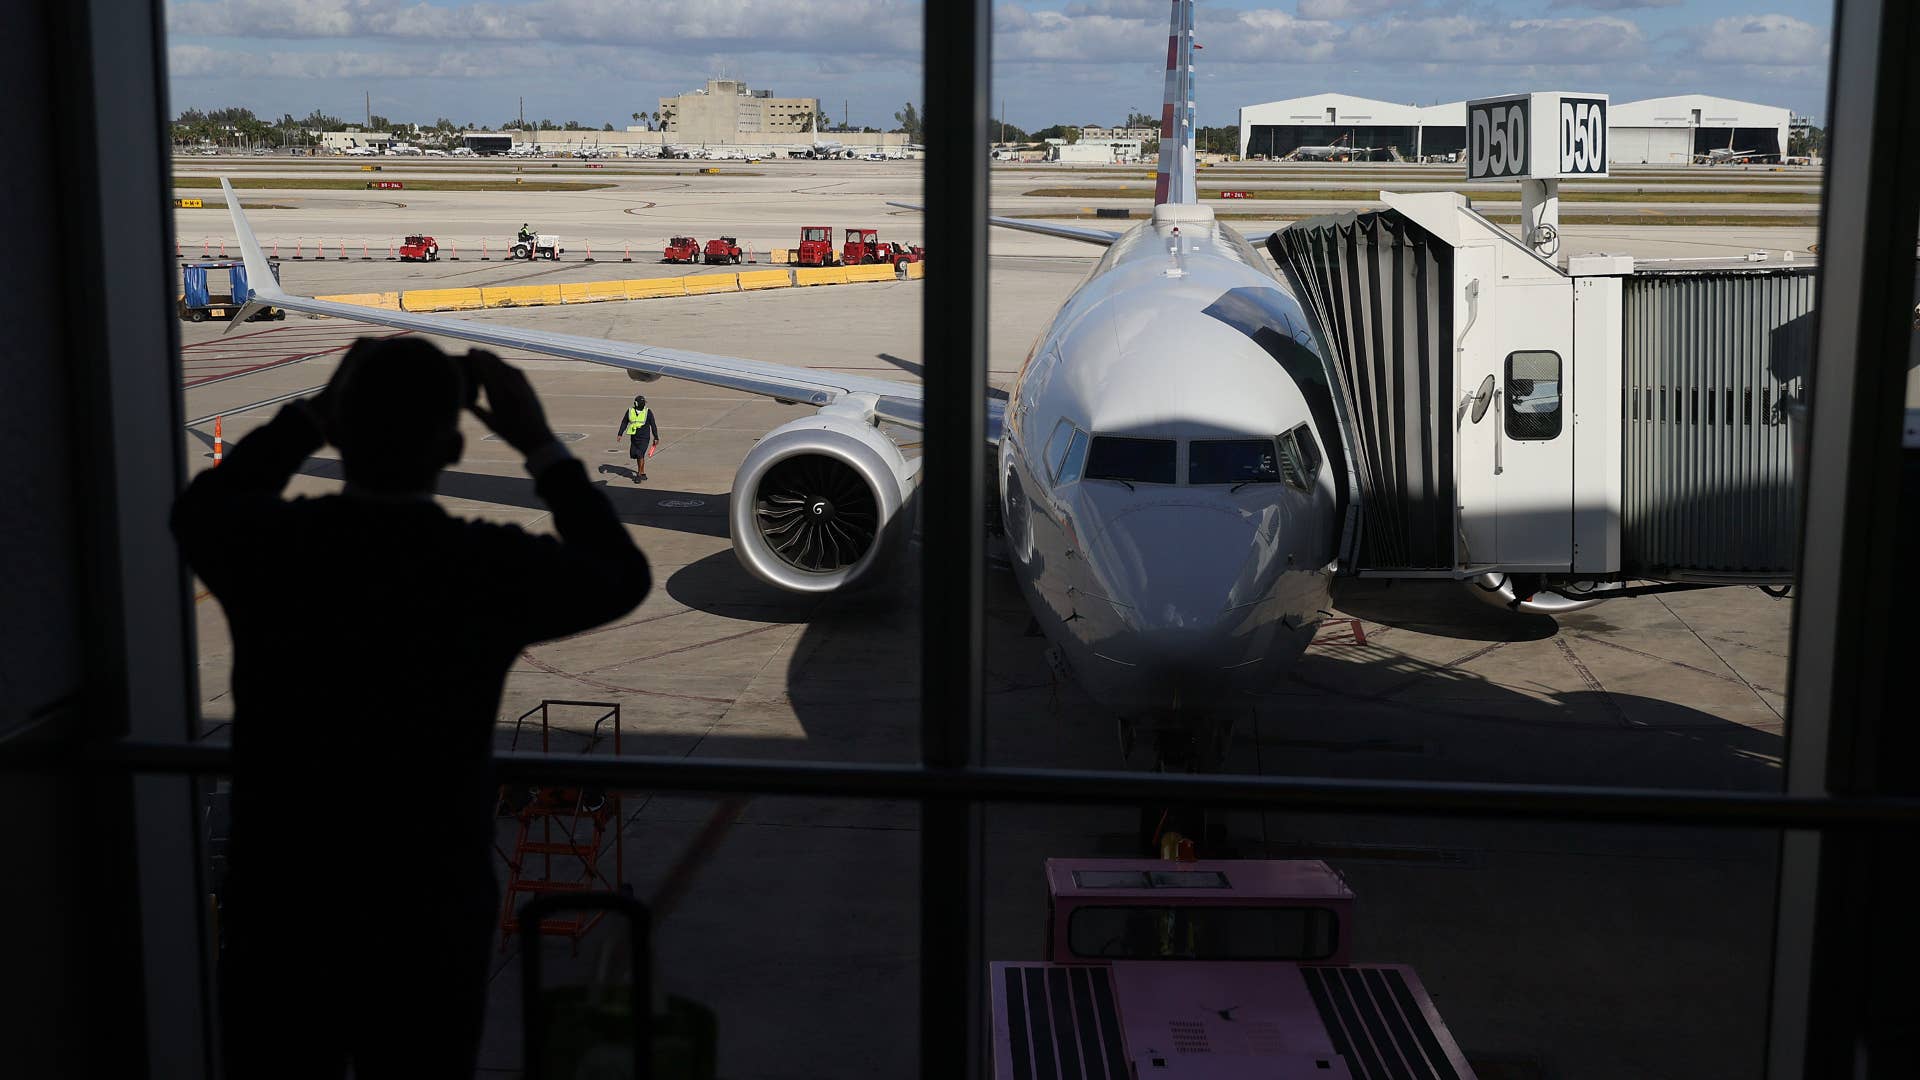 American Airlines flight 718, a Boeing 737 Max, is seen parked at its gate at Miami International Airport as passengers board for the flight to New York.